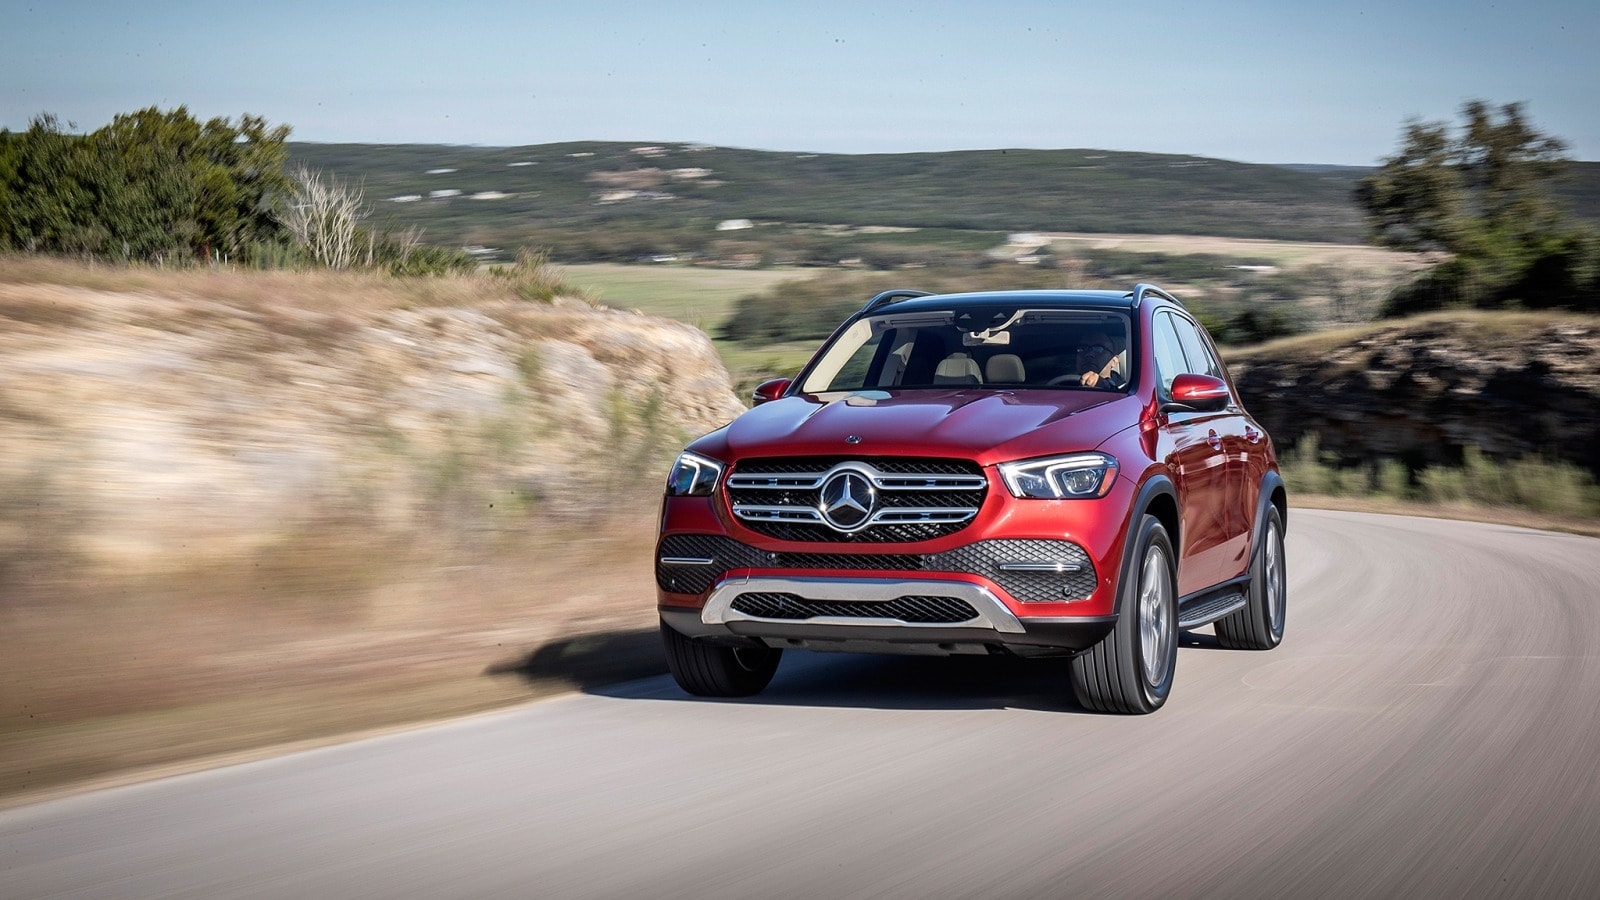 Best Luxury SUVs: Top-Rated Luxury SUVs for 2019 | Edmunds